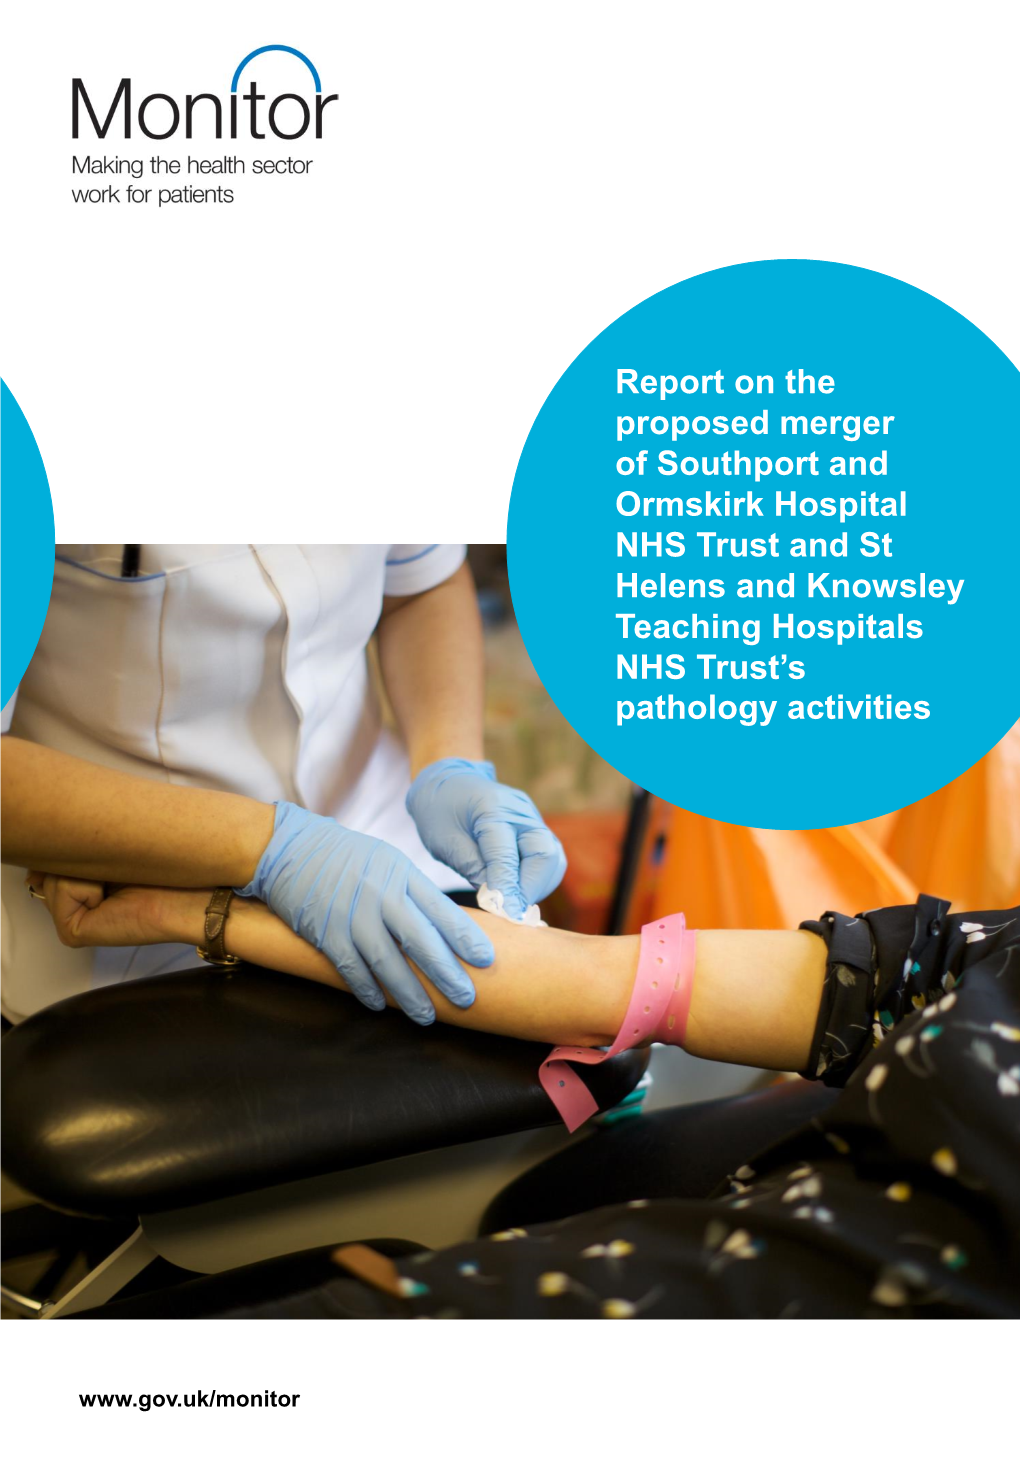 Report on the Proposed Merger of Southport and Ormskirk Hospital NHS Trust and St Helens and Knowsley Teaching Hospitals NHS Trust’S Pathology Activities